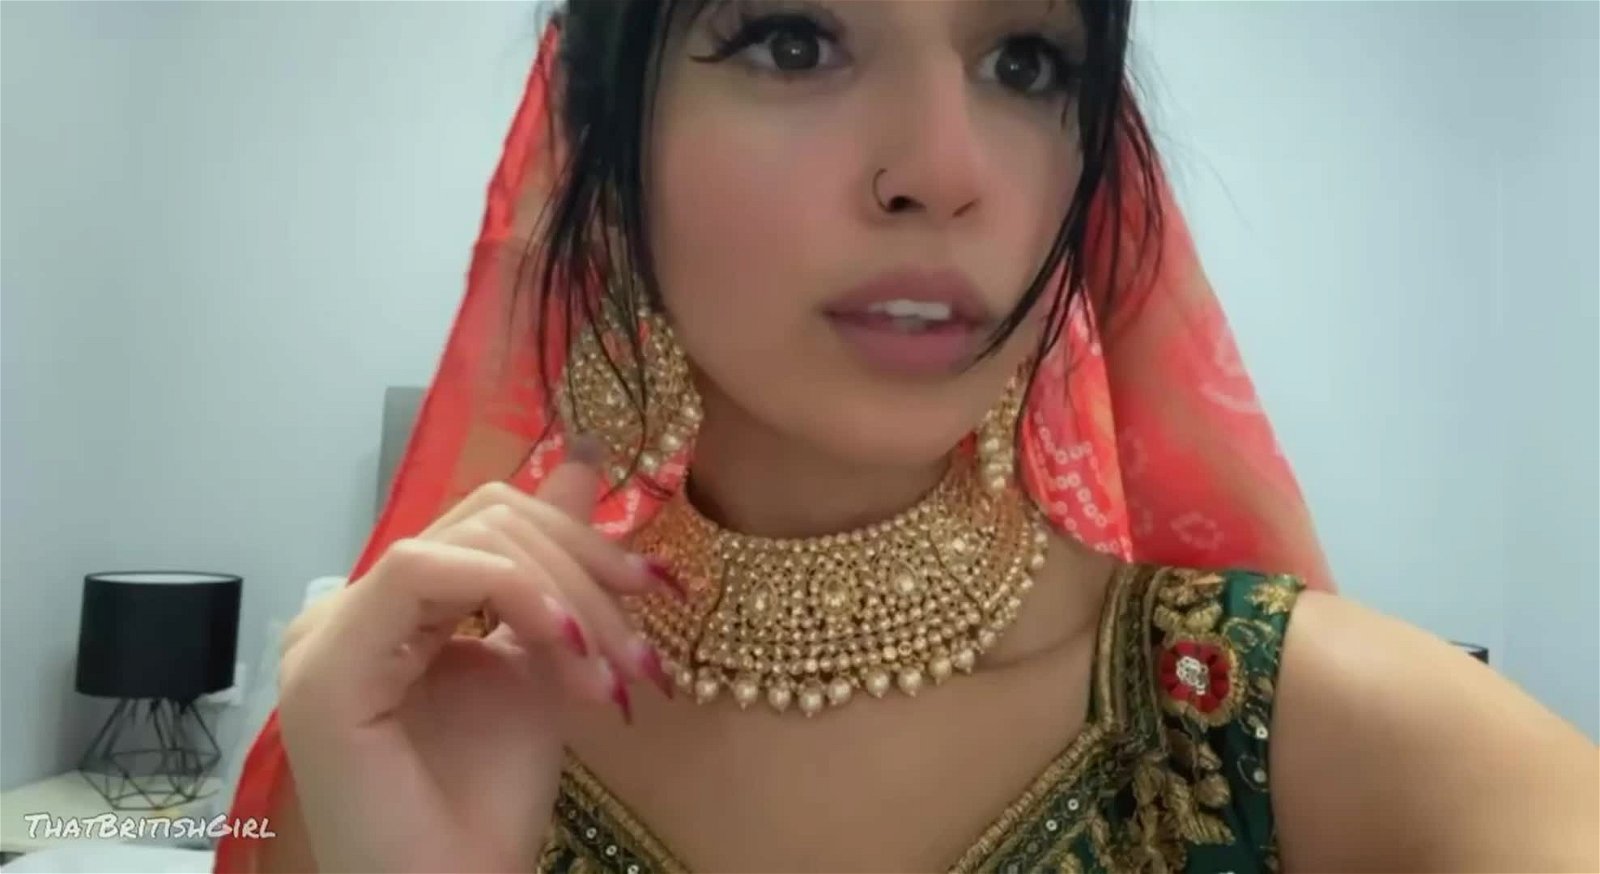 Shared Video by Asmodeus with the username @asmodeuslustdemon,  August 7, 2023 at 1:20 AM. The post is about the topic Hijab Hotties and the text says '#Dupatta #Chunari
The dupattā is a shawl traditionally worn by women in Indian subcontinent to cover the head and shoulders'